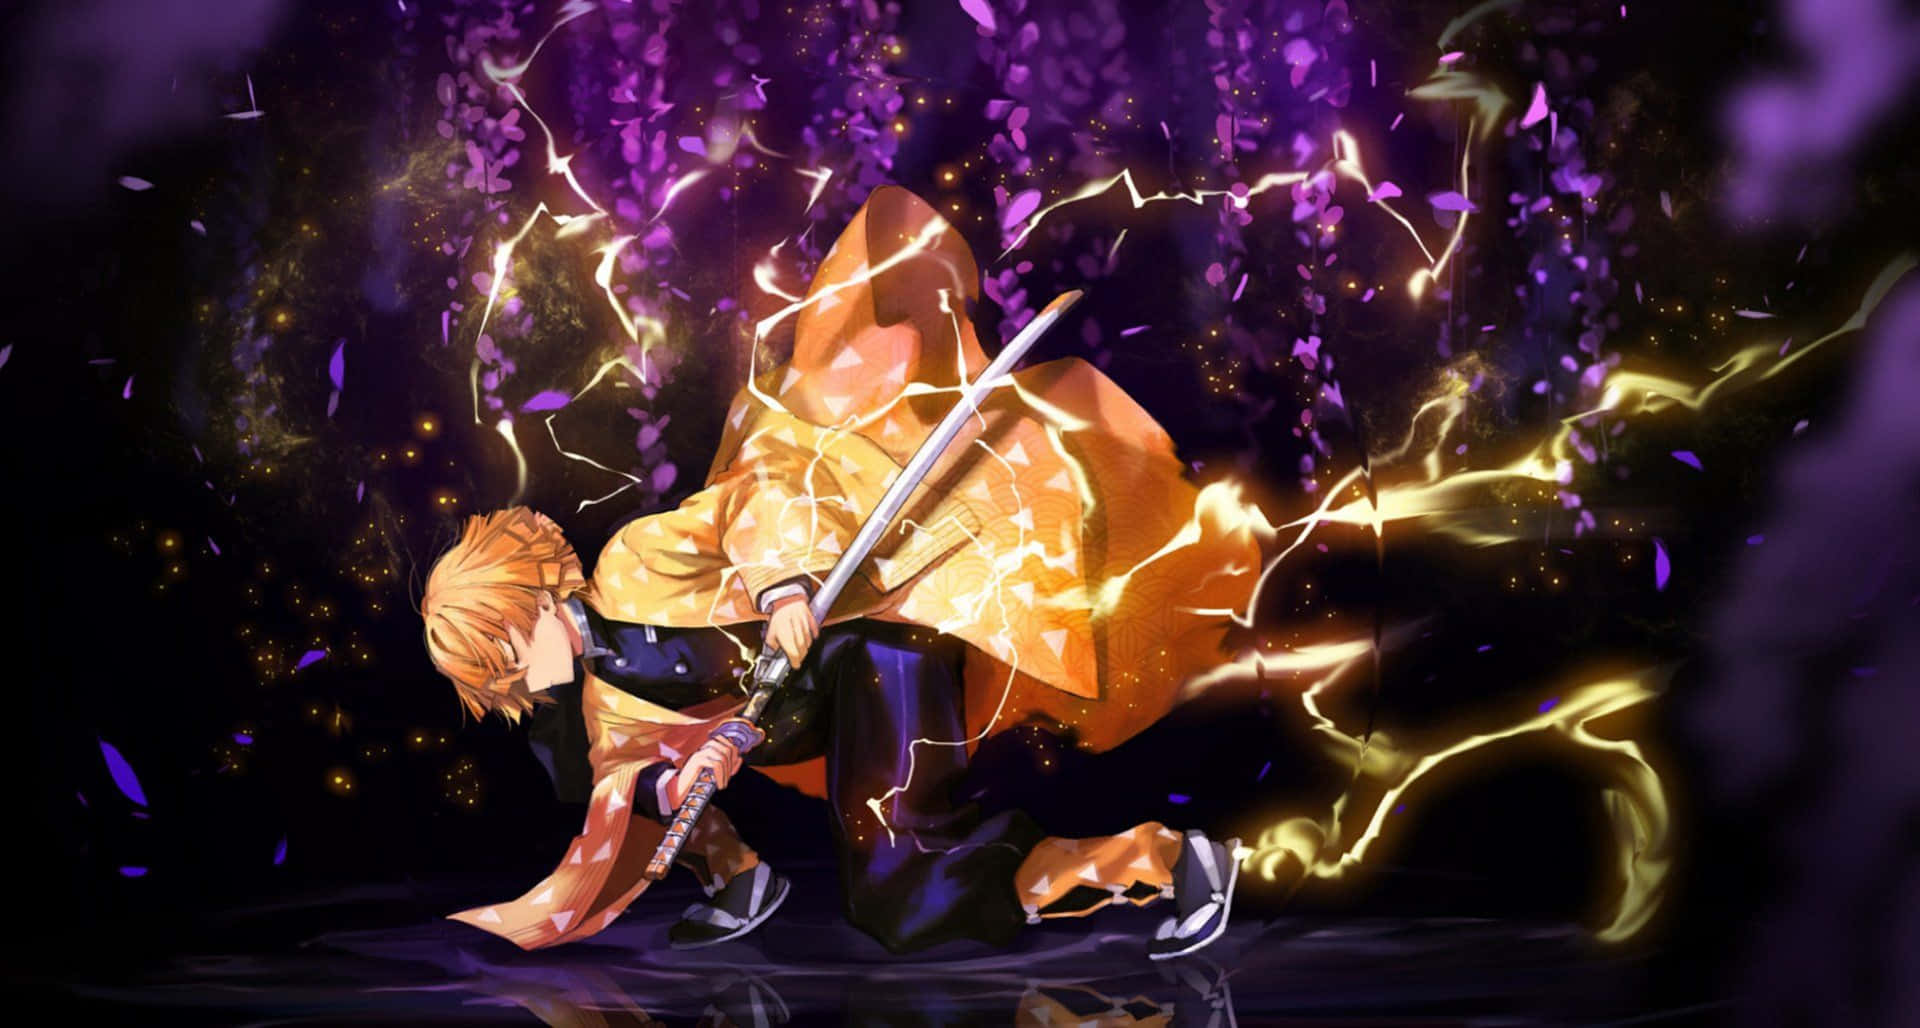 The courageous Zenitsu Agatsuma fights bravely against a demon. Wallpaper